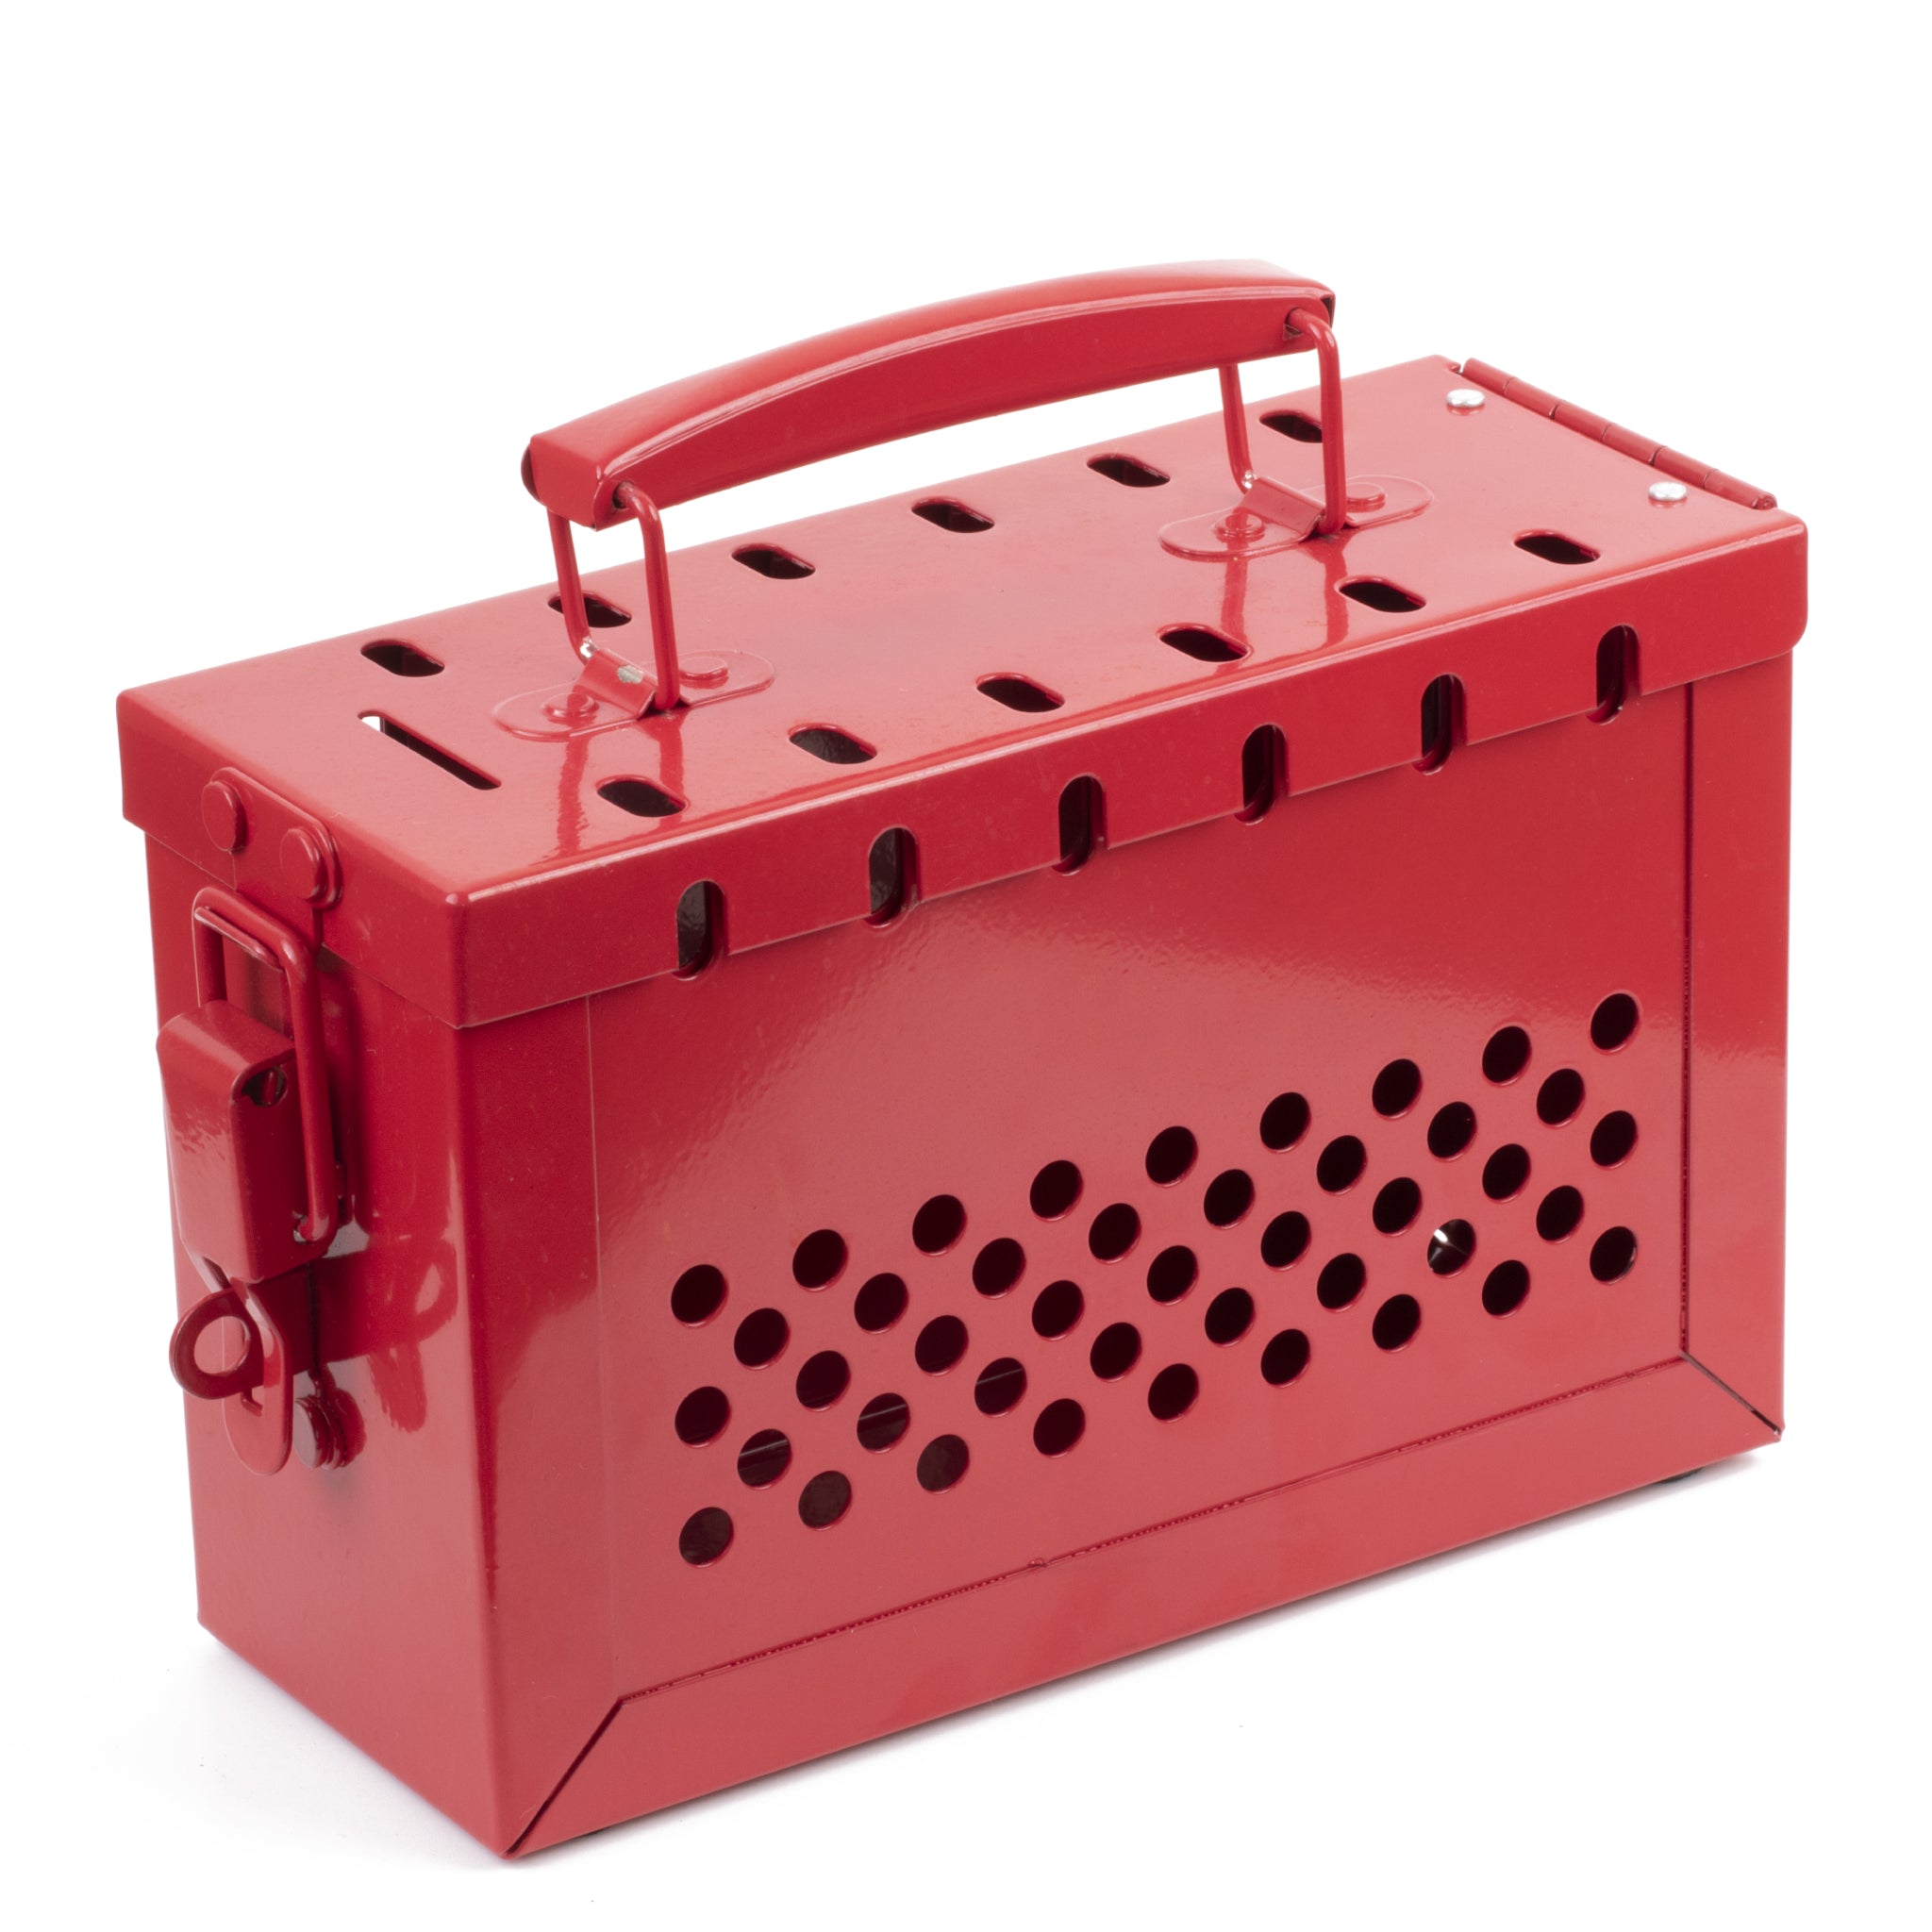 Lockout Tagout Station Cabinet - No LOTO Devices | TRADESAFE